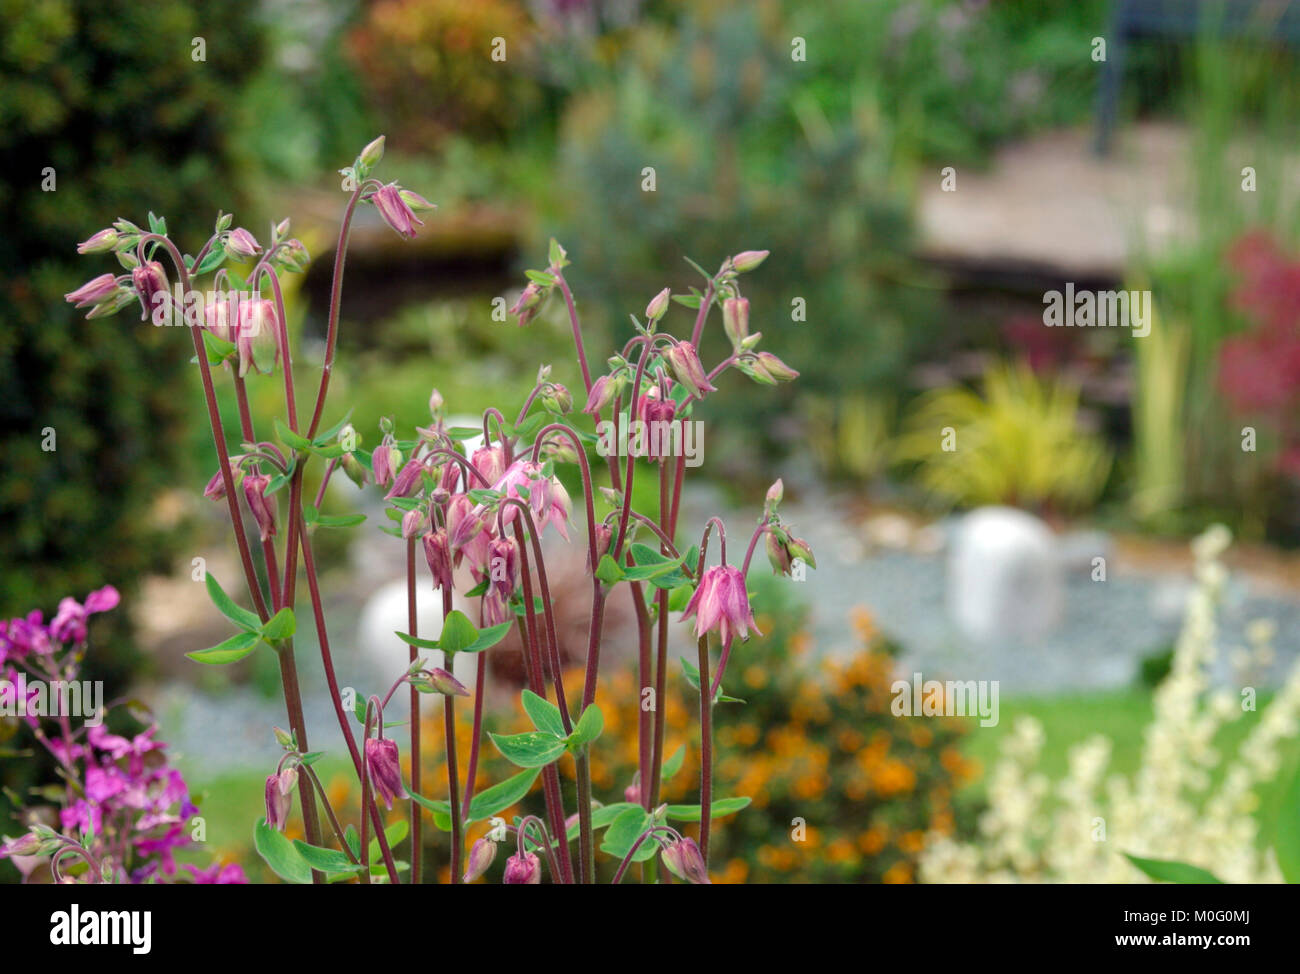 Mauve aquilegia with a garden out of focus behind Stock Photo